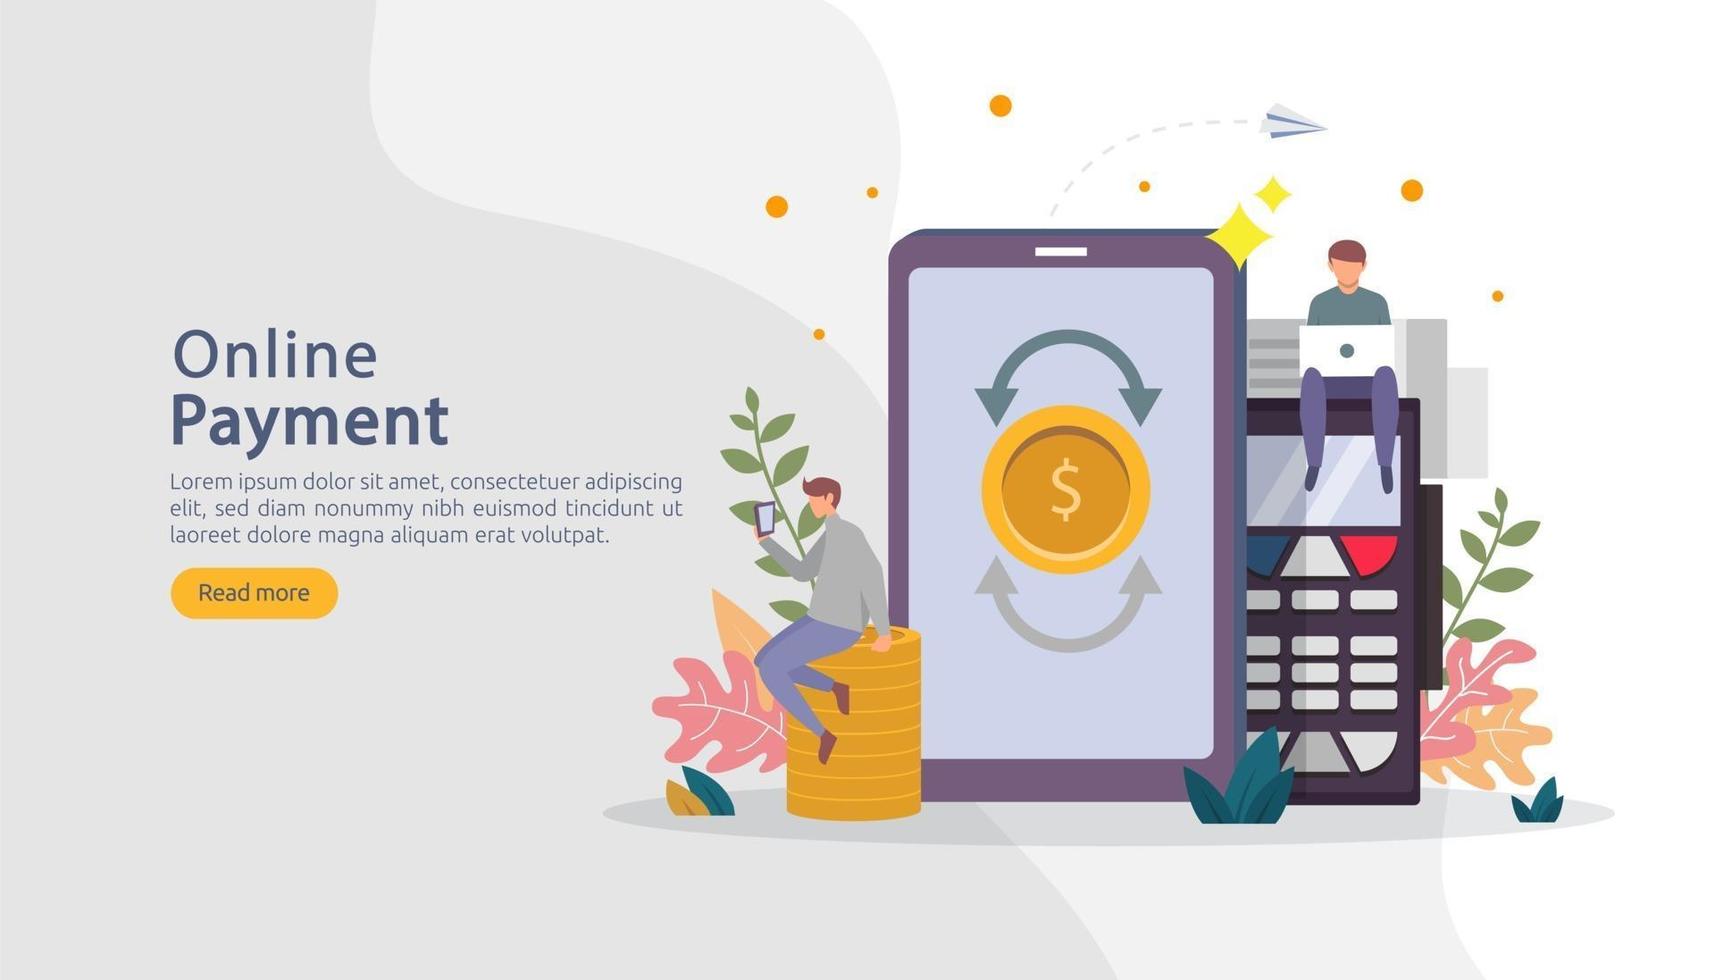 E-commerce market shopping online illustration with tiny people character. mobile payment or money transfer concept. template for web landing page, banner, presentation, social media, print media. vector